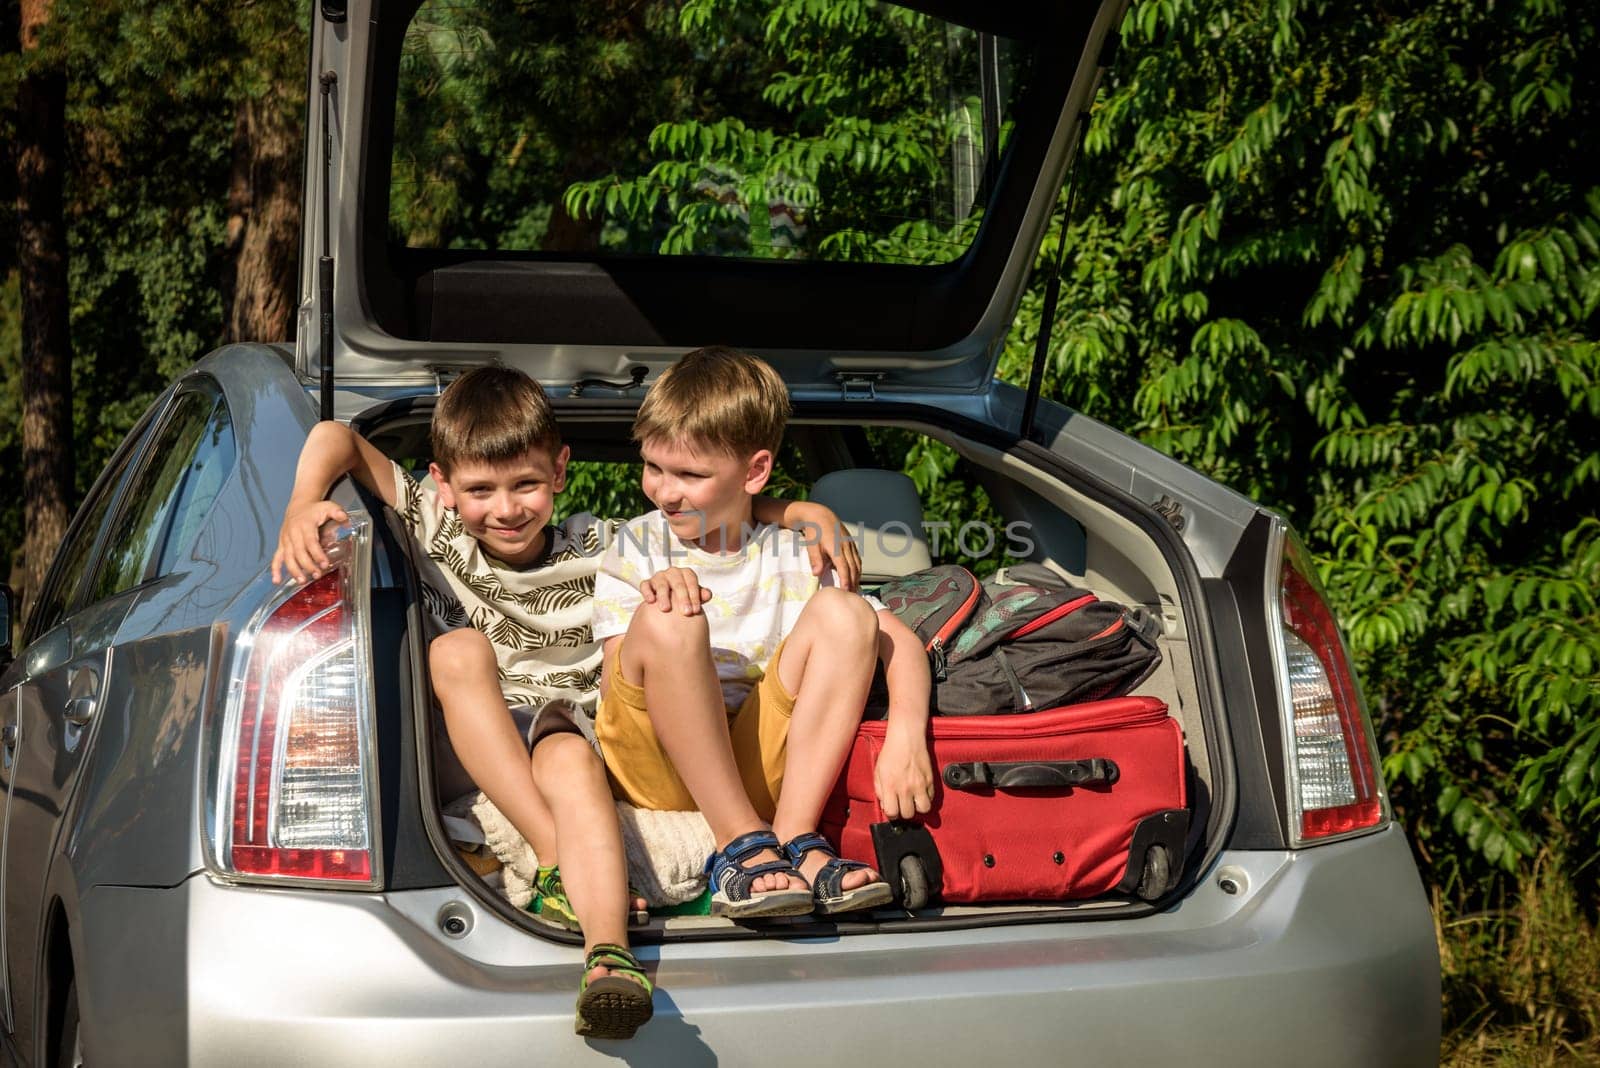 Two cute boys sitting in a car trunk before going on vacations with their parents. Two kids looking forward for a road trip or travel. Summer break at school. Family travel by car.